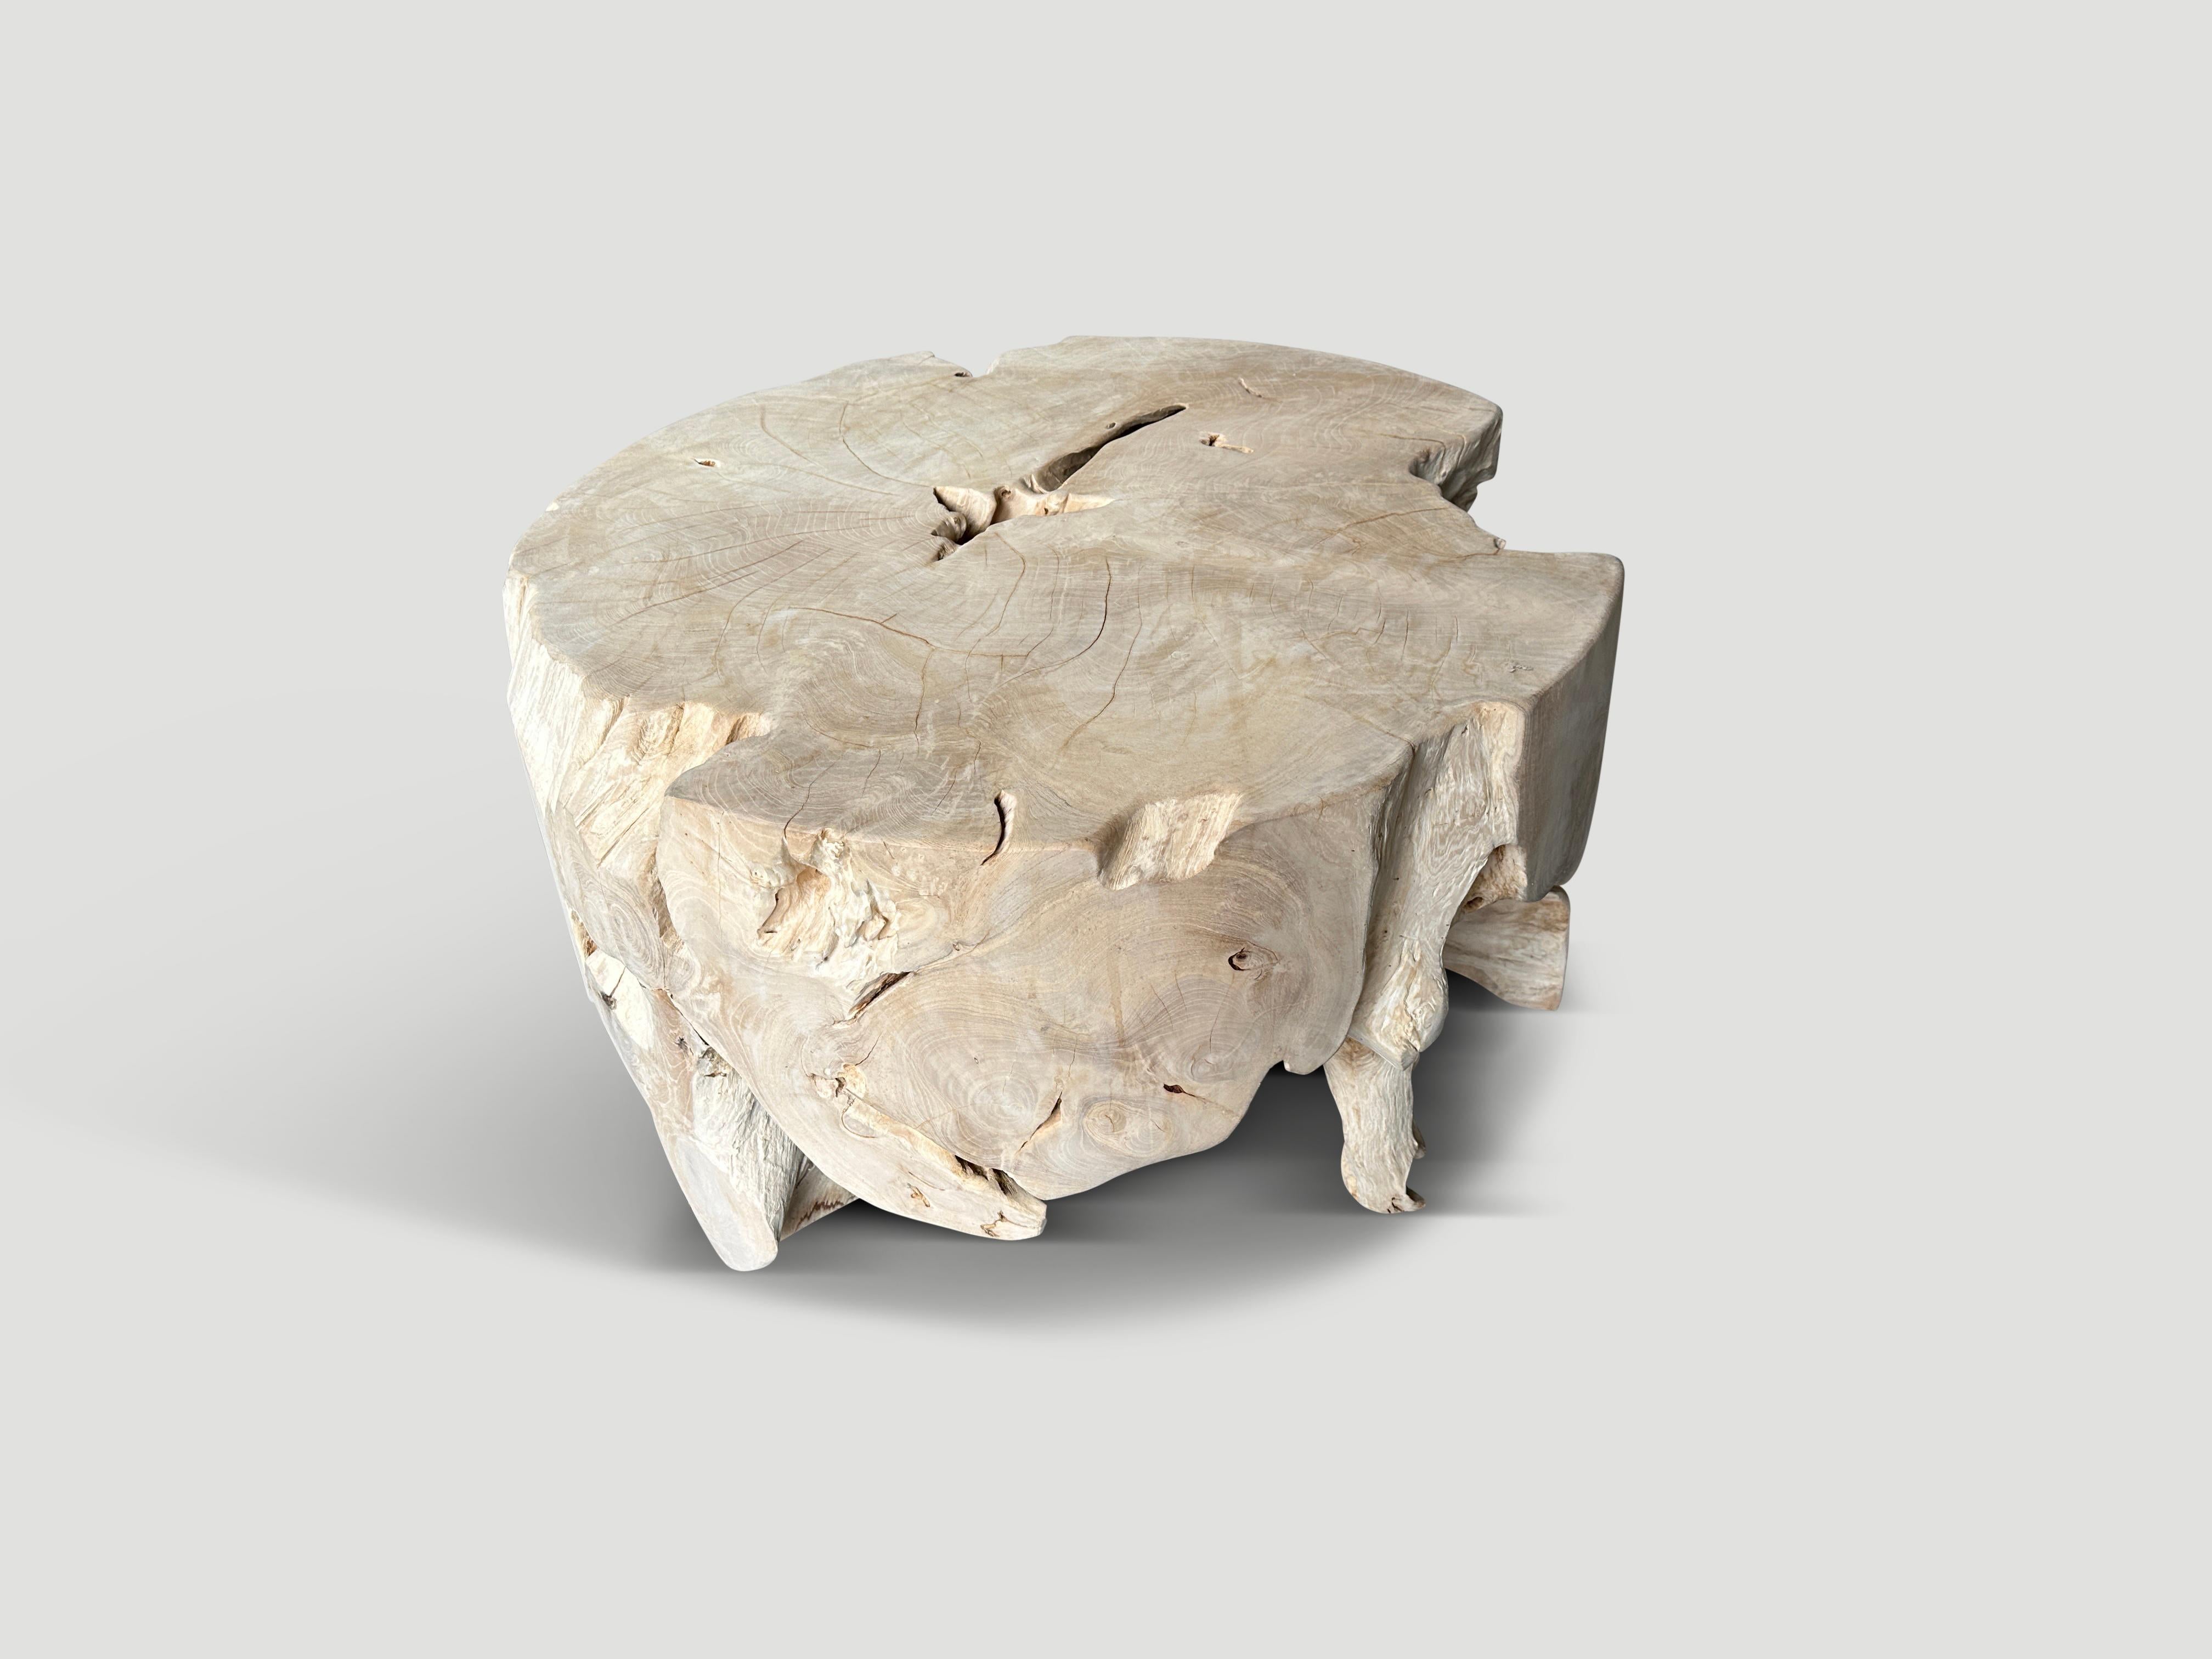 Organic reclaimed teak wood round coffee table bleached with a light white washed revealing the beautiful wood grain. We can also produce this shape charred or natural teak. Please inquire.

The St. Barts Collection features an exciting line of